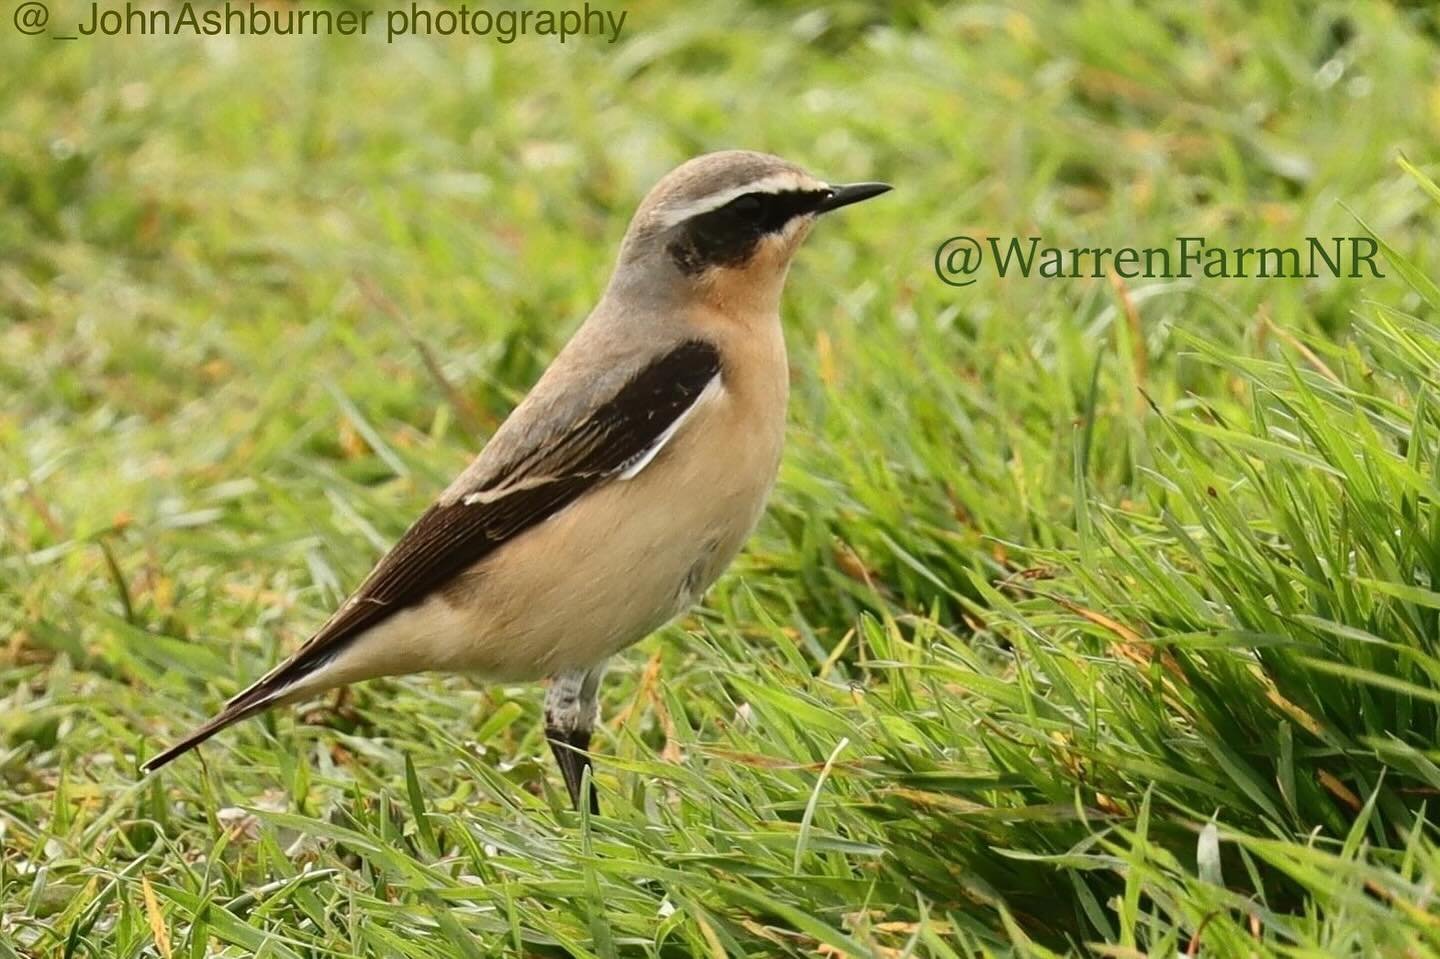 THE WHEATEARS ARE BACK!🐦&zwj;⬛💚☺️Our urban meadow is a vital food stop for both resident &amp; migratory birds🌼They winter in central Africa &amp; can be best spotted here at #warrenfarmnr hopping on the ground filling up on insects🪲Safeguarding 